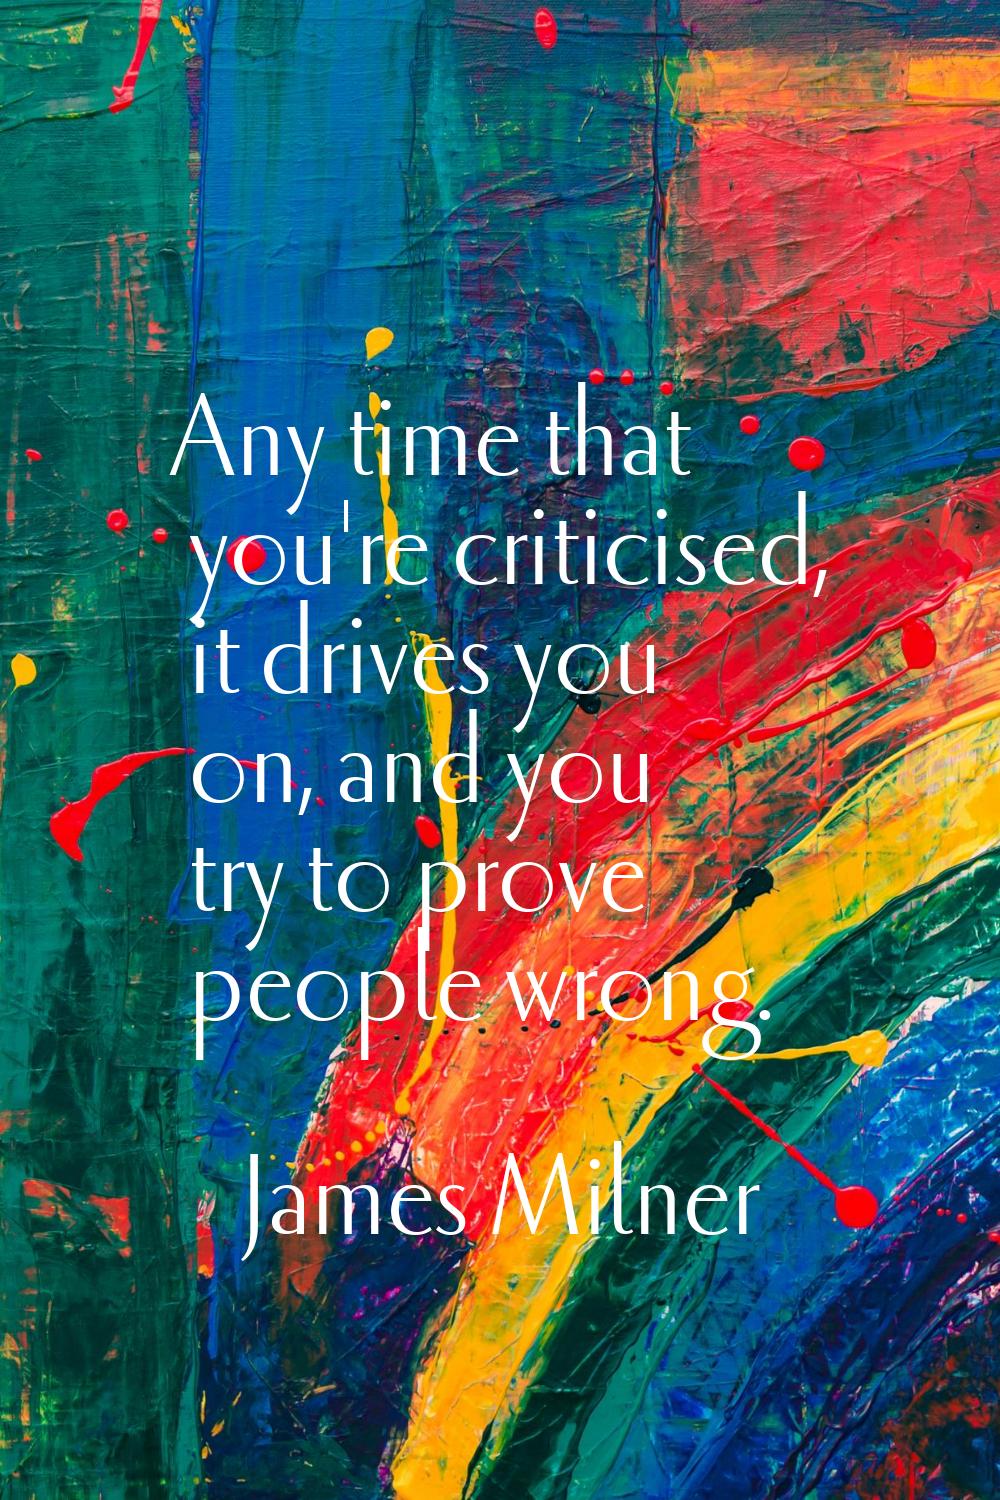 Any time that you're criticised, it drives you on, and you try to prove people wrong.